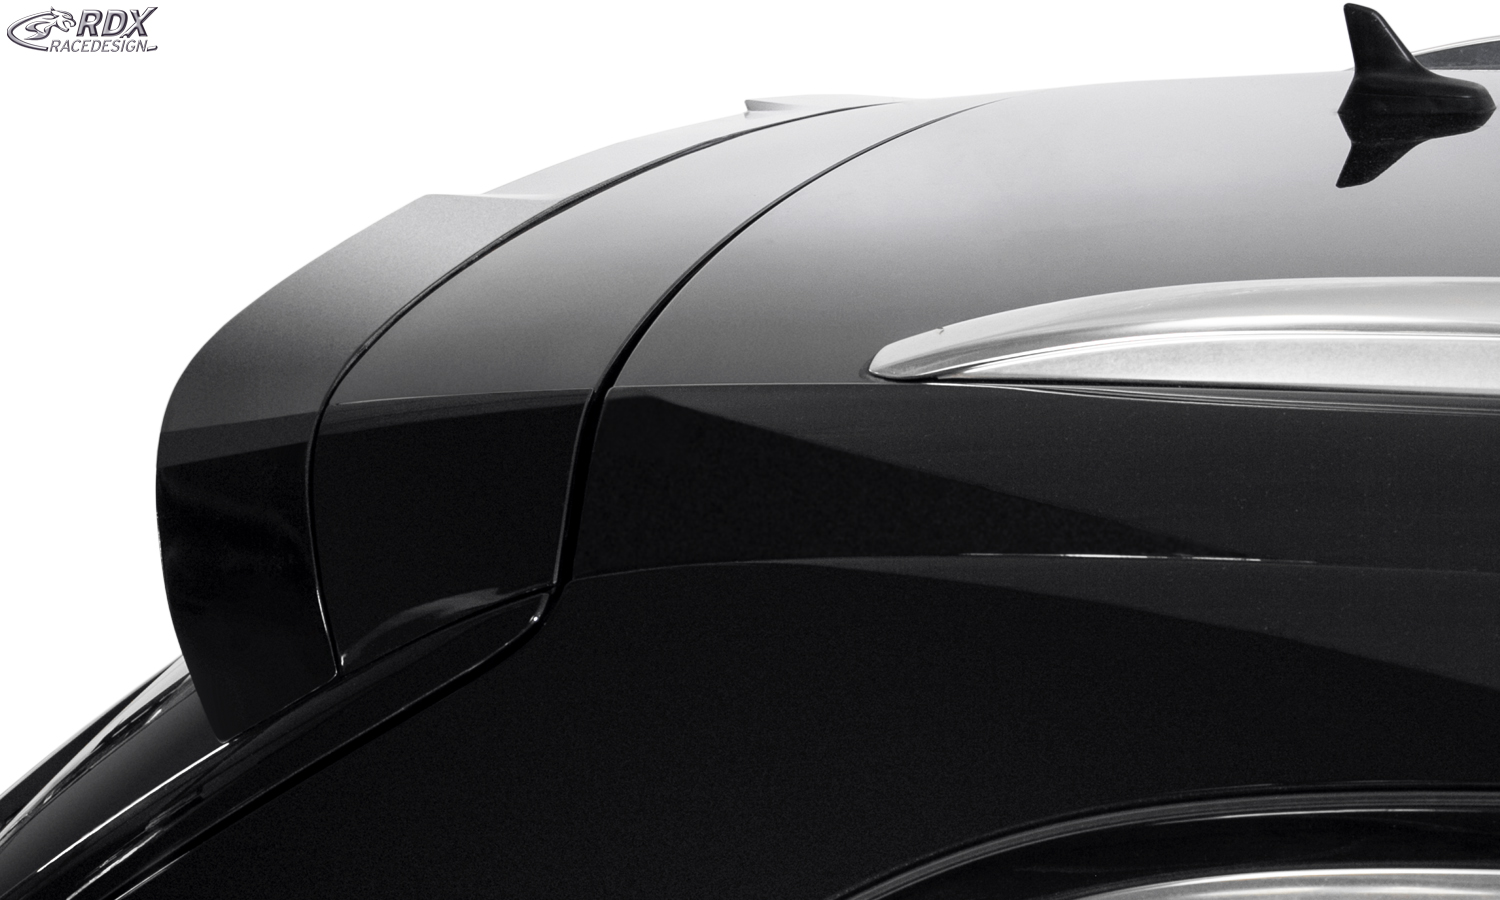 RDX Roof Spoiler for AUDI Q7 (4L) Rear Wing Trunk Tailgate